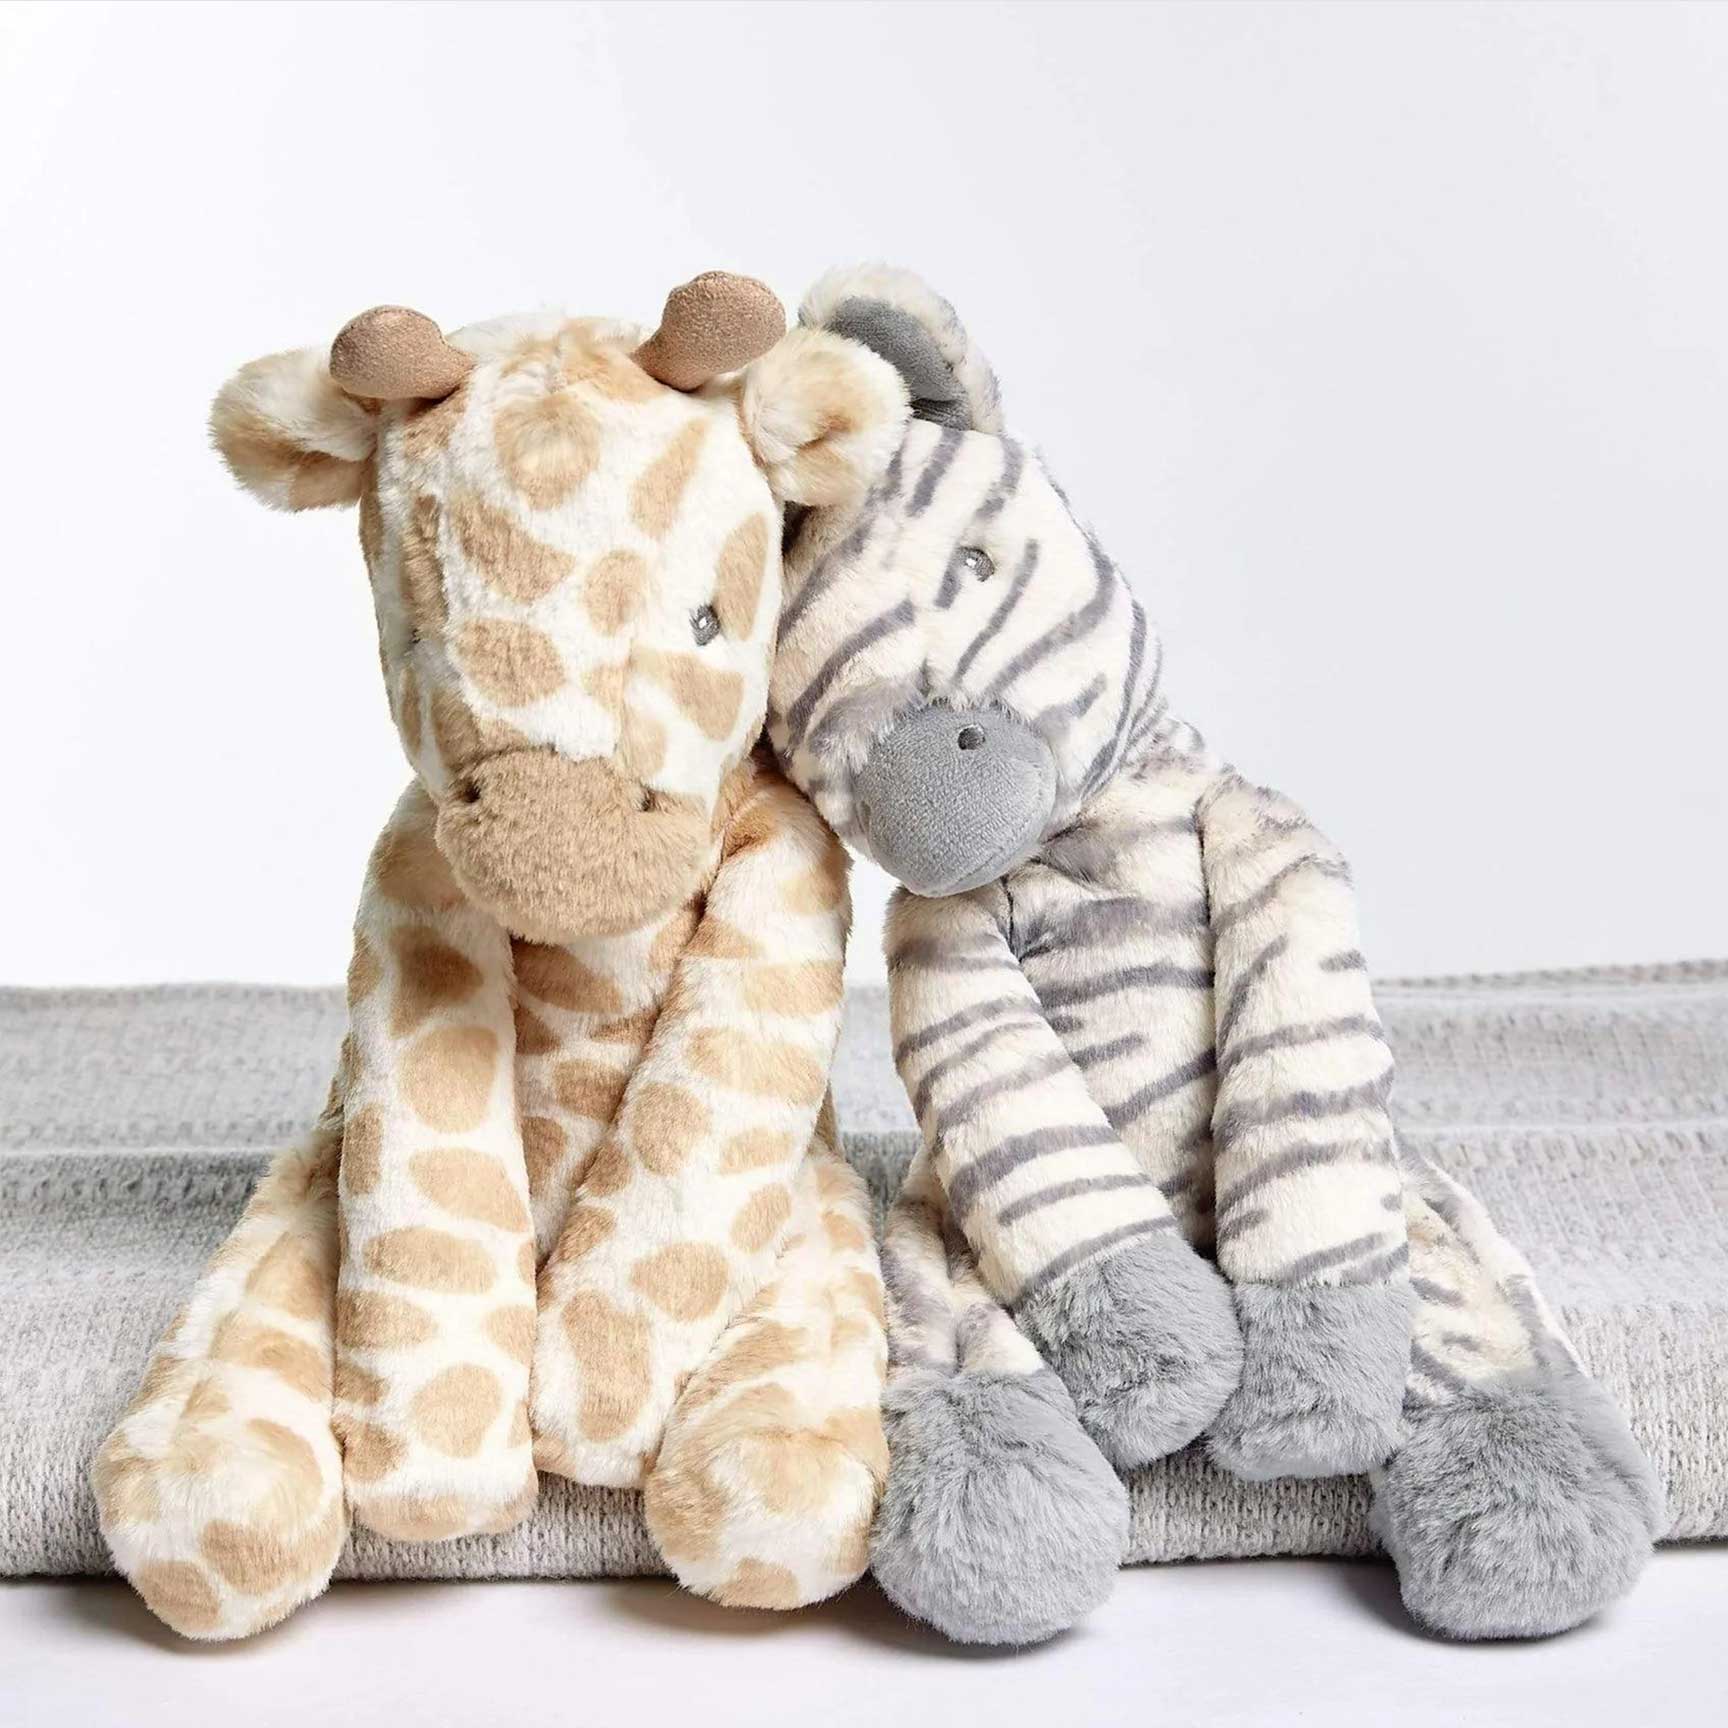 Mamas & Papas Soft Toy Welcome to the World in Giraffe Soft Animals 4855WW202 5057232421986